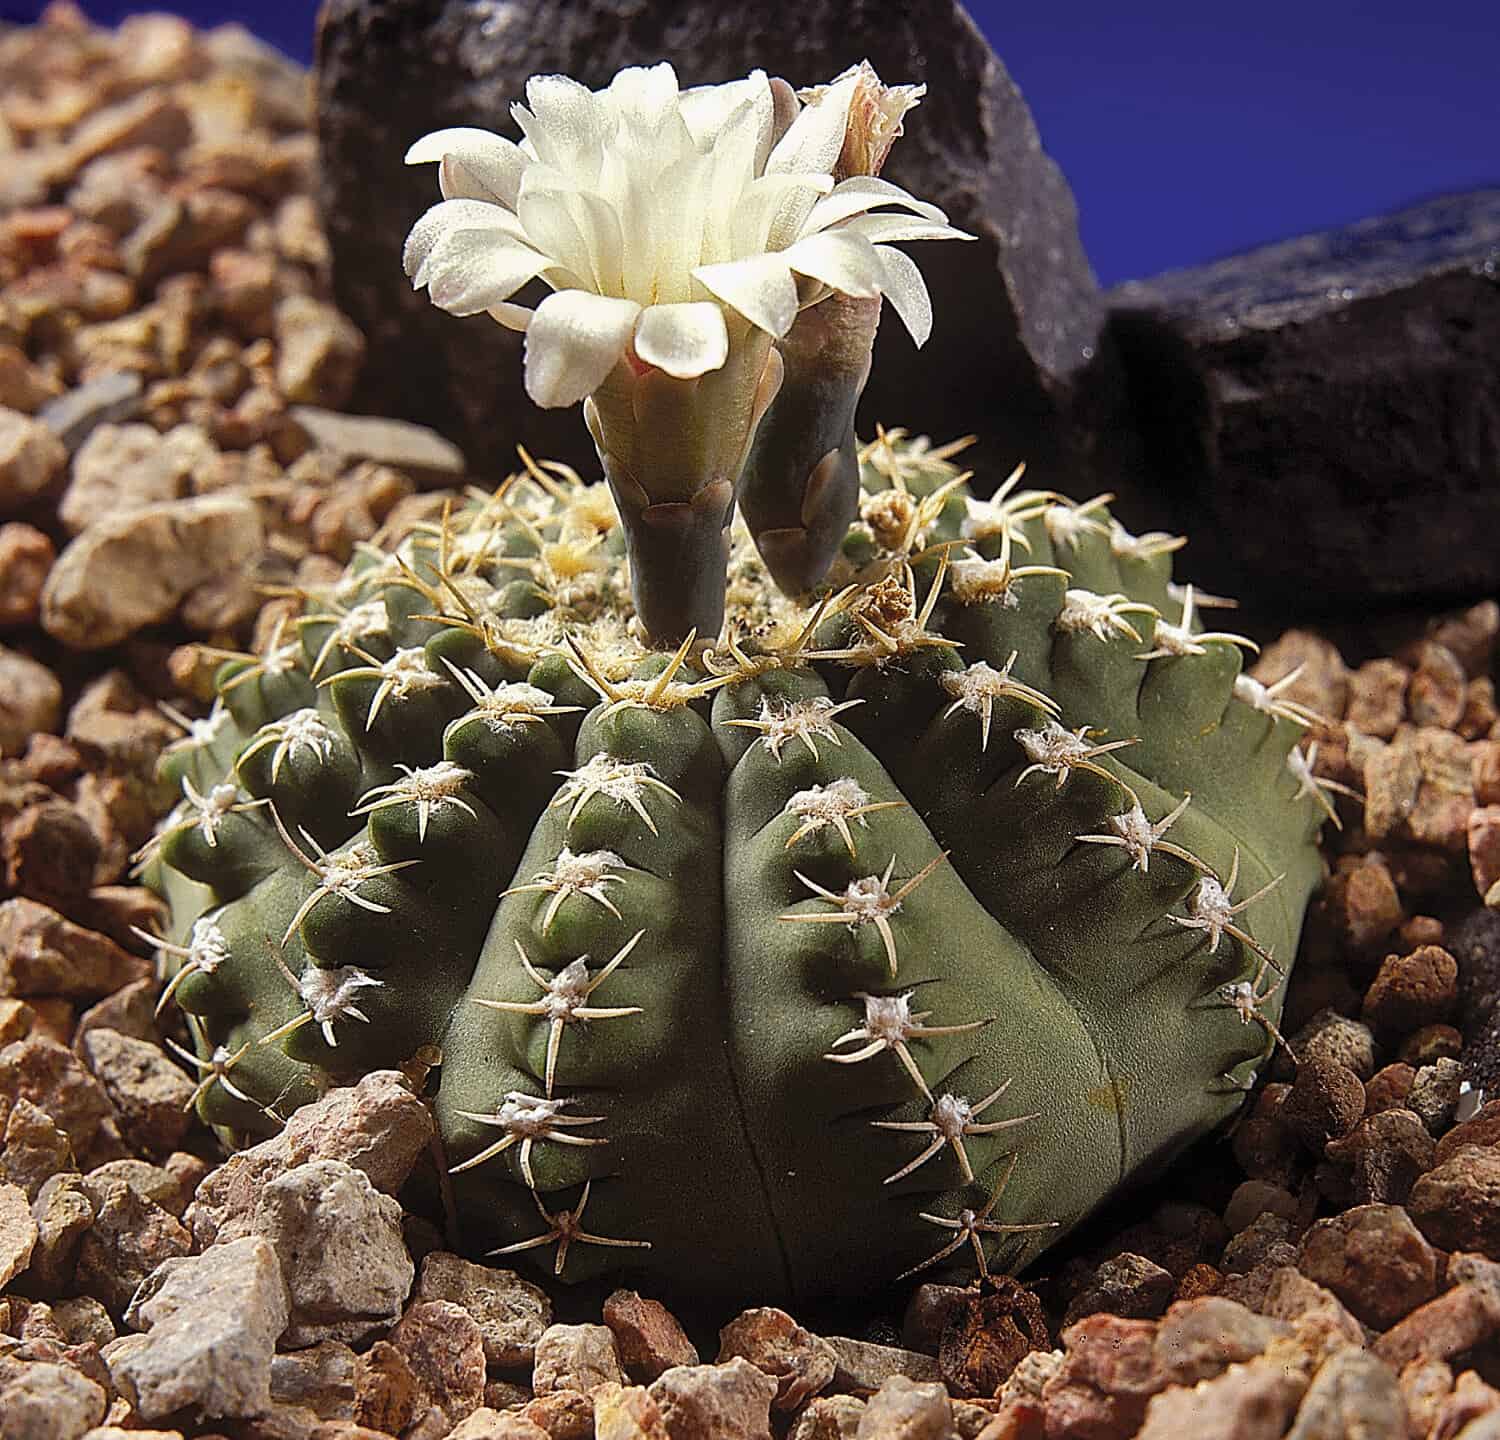 Cactus. Gymnocalycium quehlianum v. albispinum with flower. A unique studio photographing with a beautiful imitation of natural conditions on a stones background.